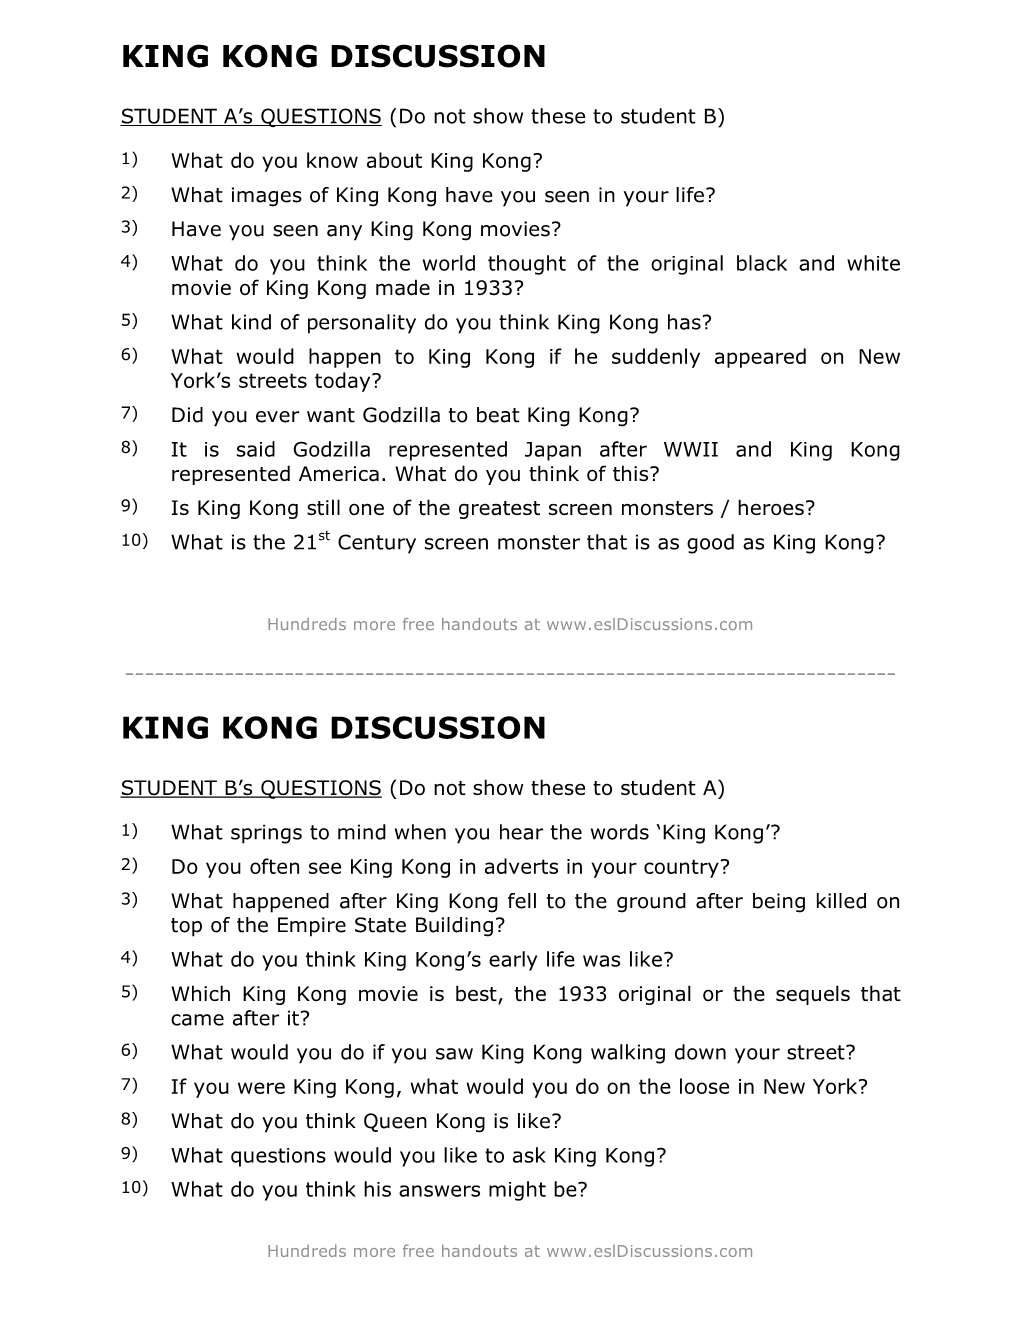 King Kong Discussion